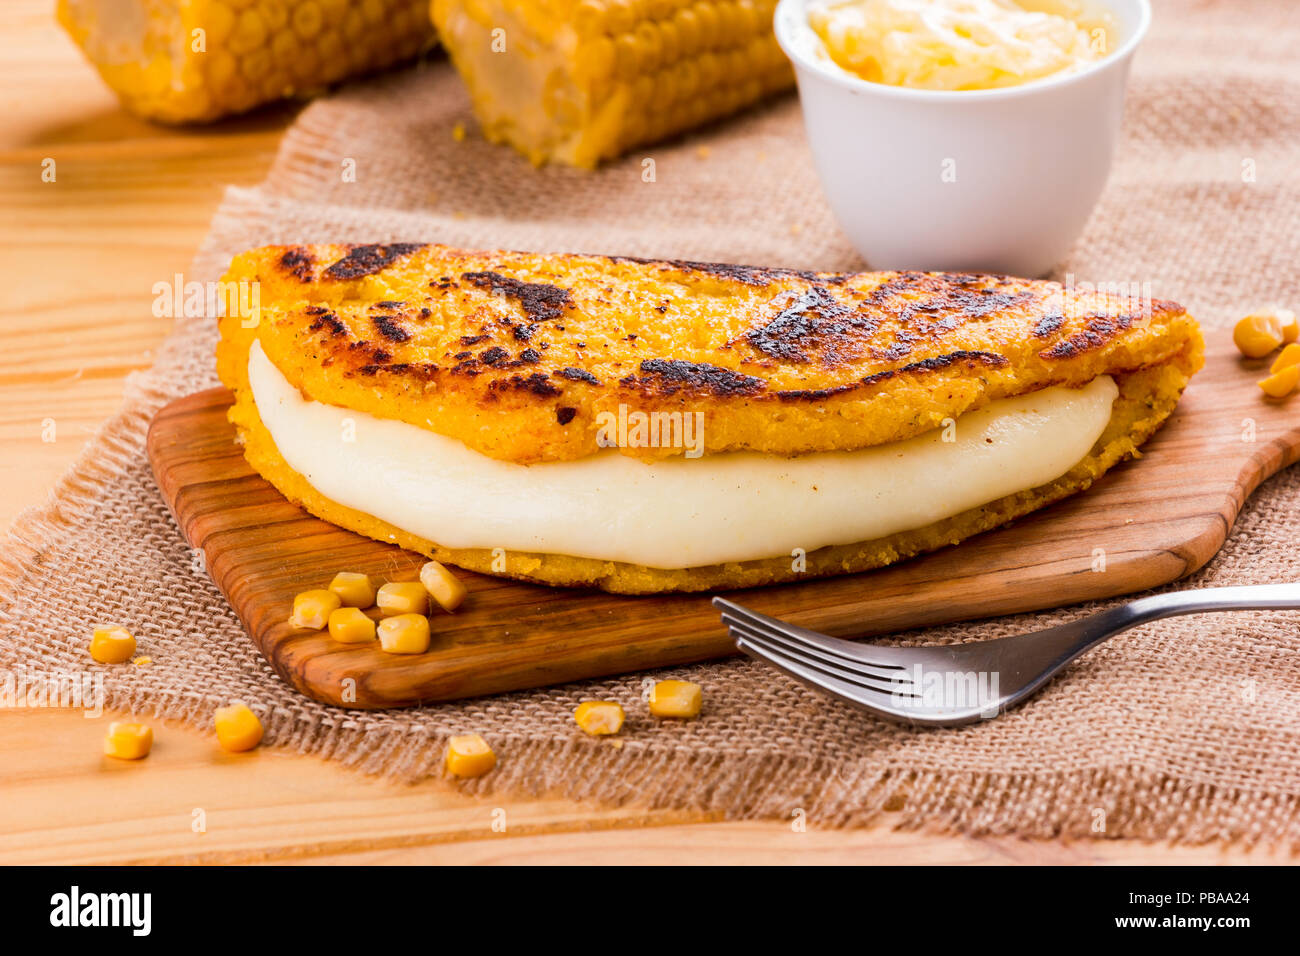 Cachapa with cheese, typical Venezuelan dish made with corn, cheese and butter Stock Photo